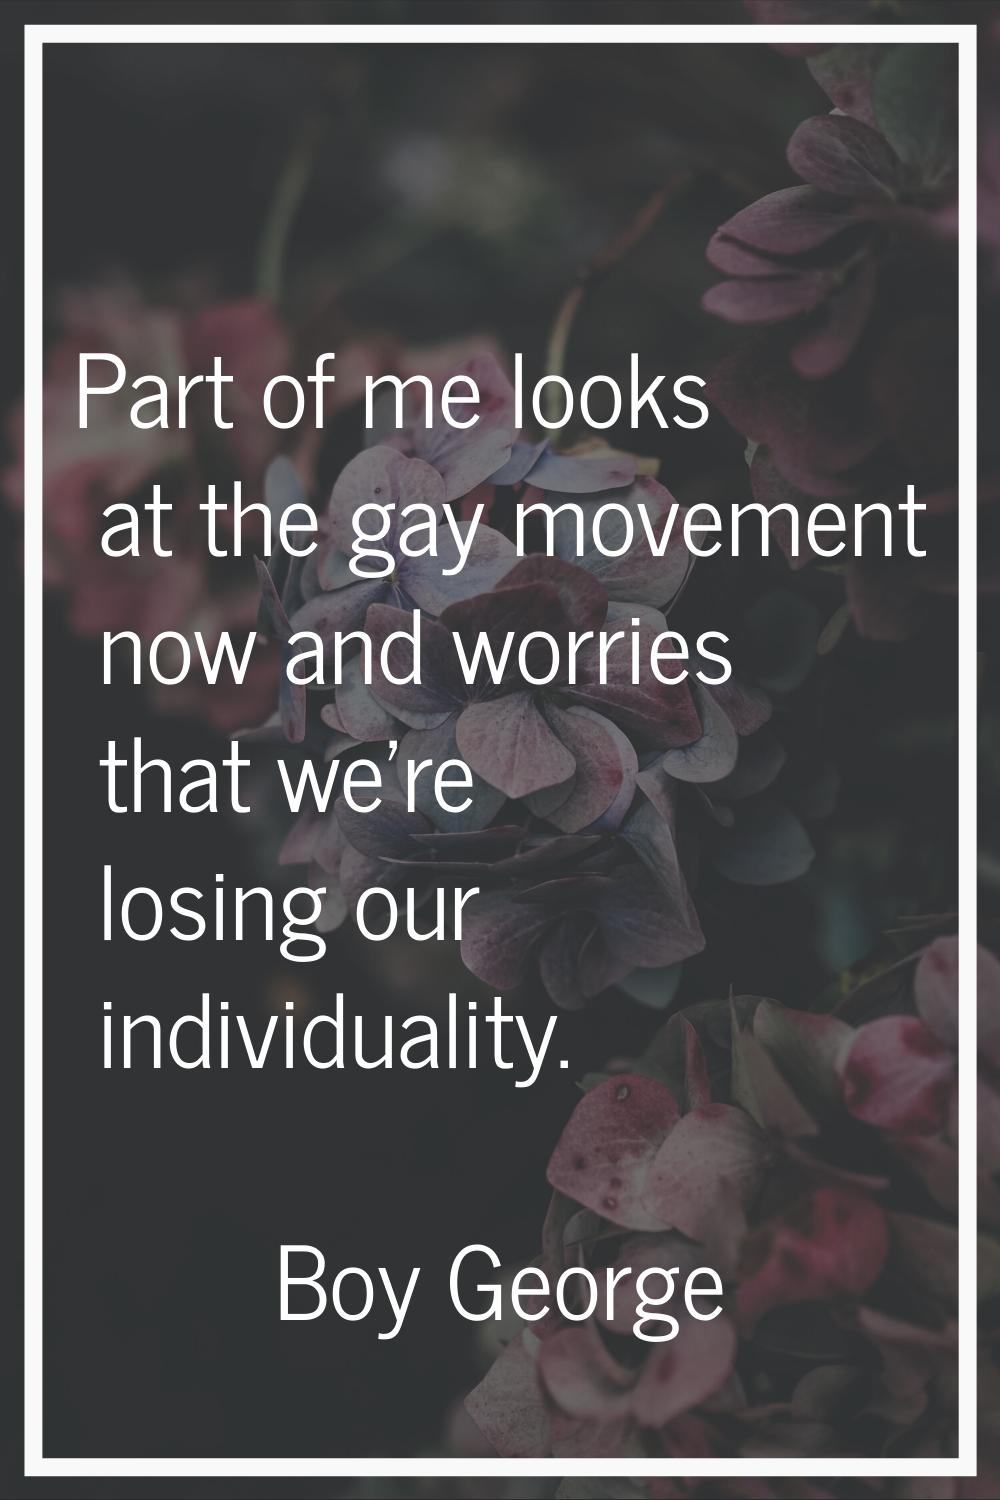 Part of me looks at the gay movement now and worries that we're losing our individuality.